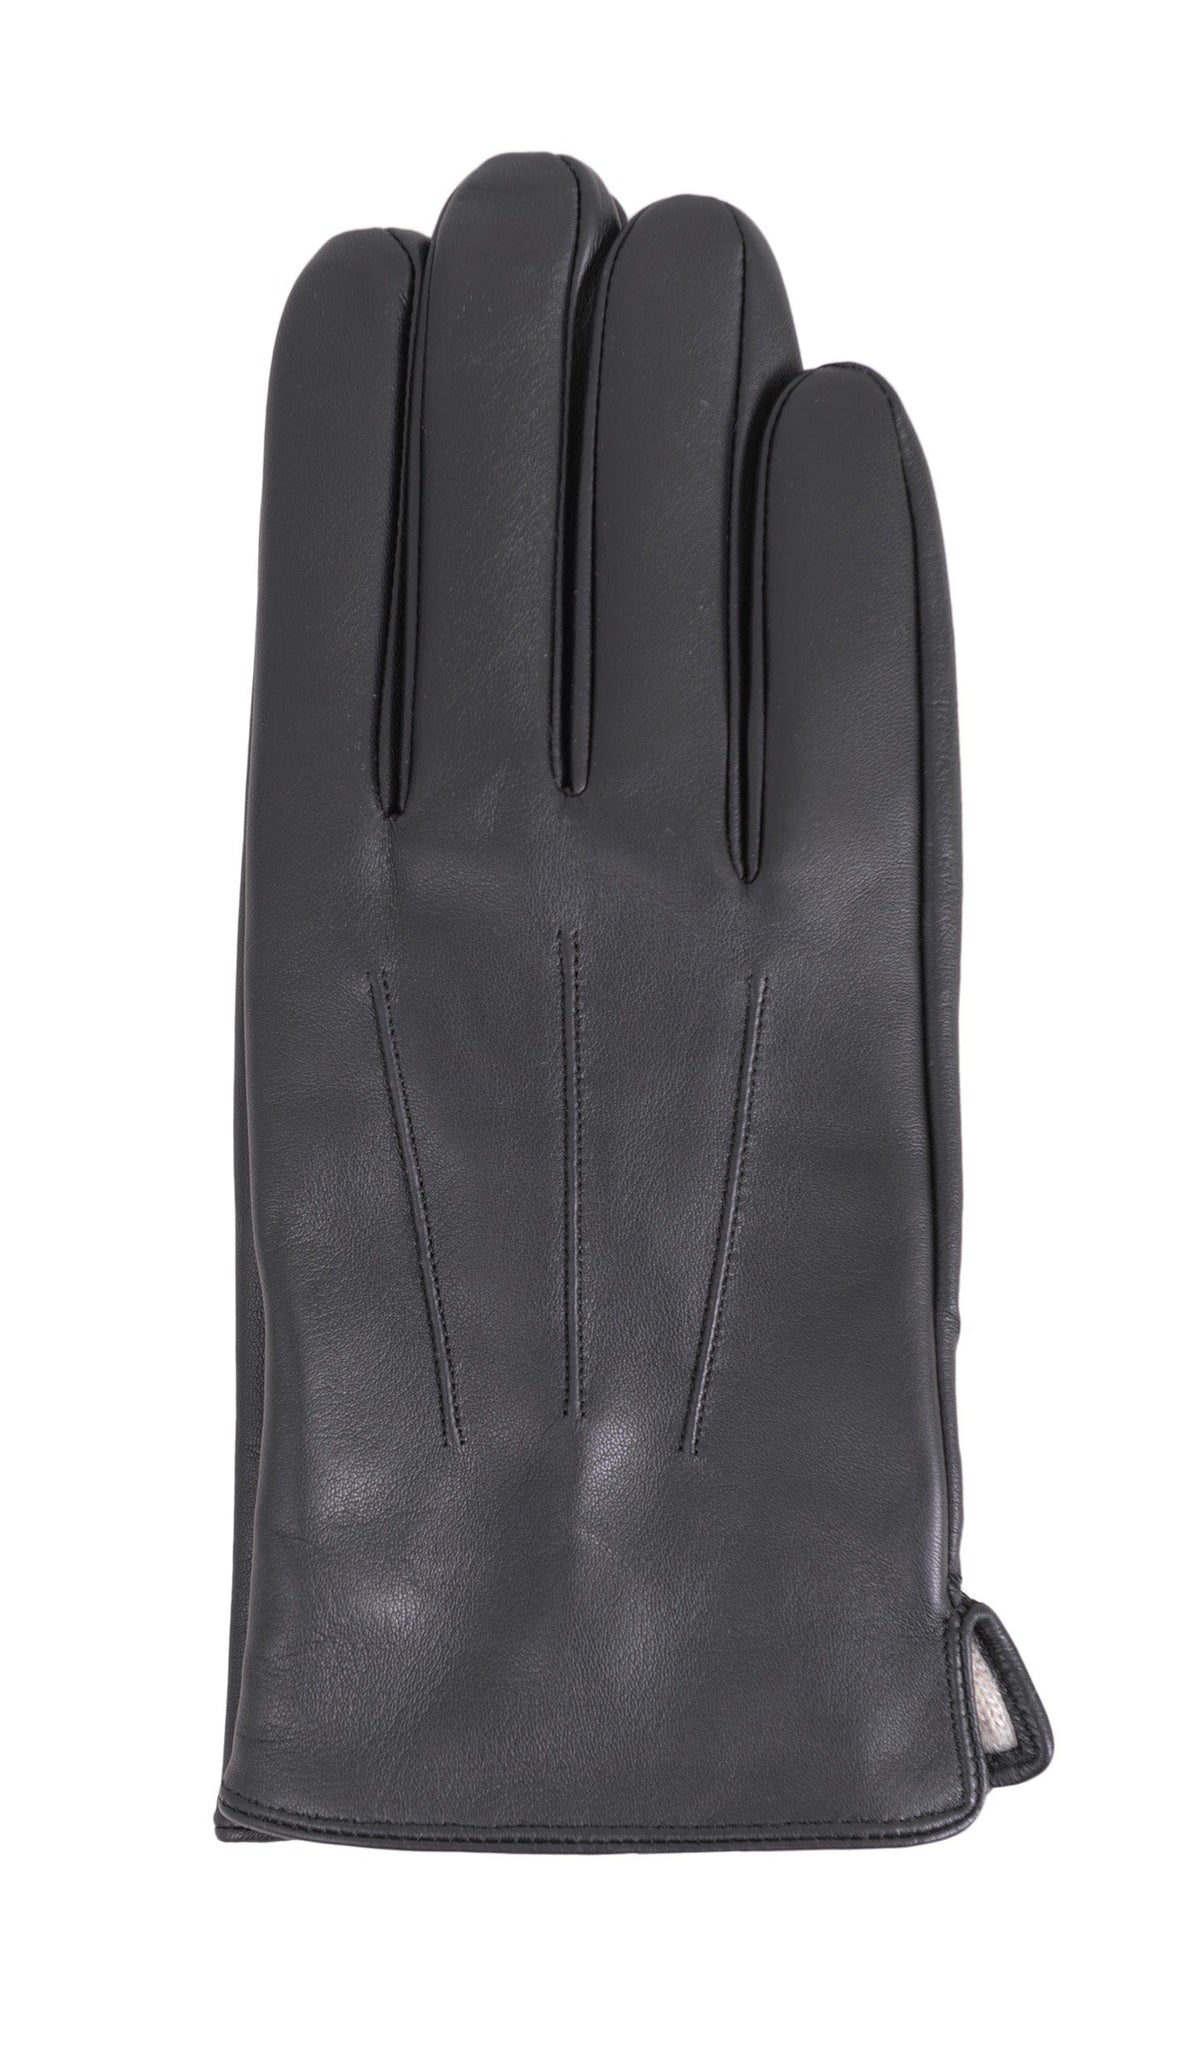 Ariston Ariston Mens Solid Black Touch Screen Leather Gloves